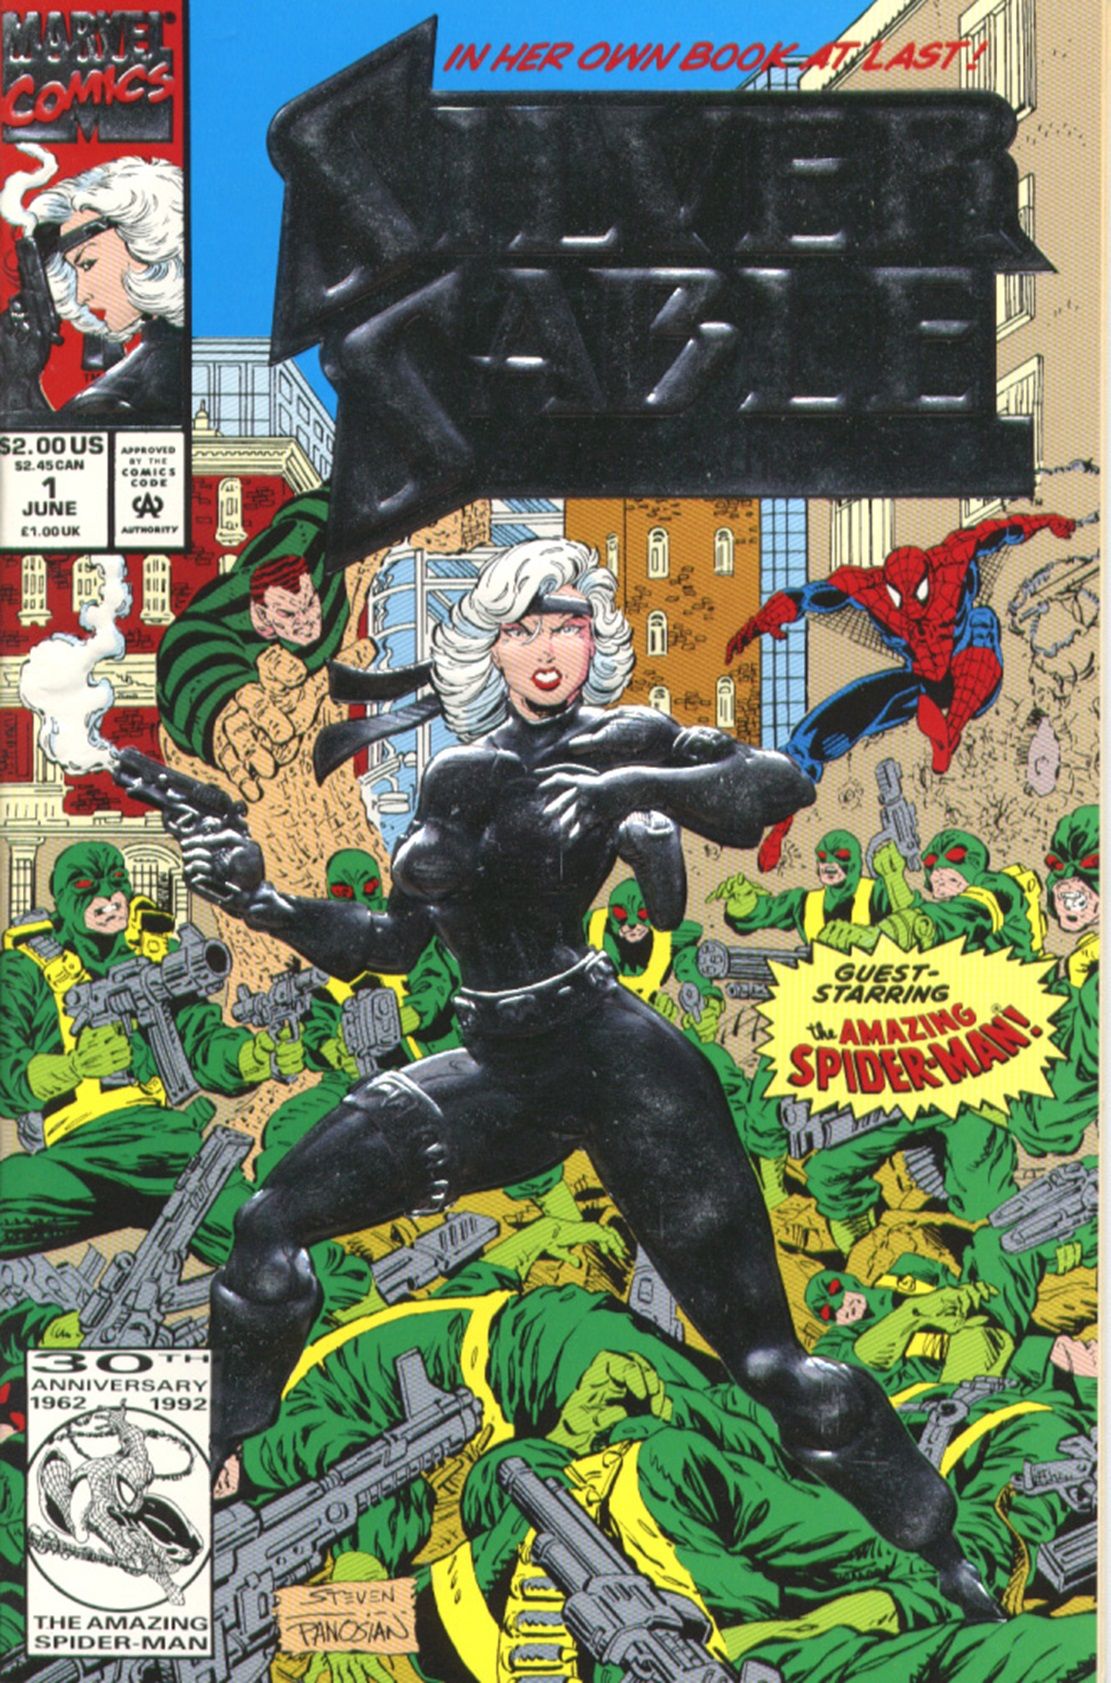 The cover of Silver Sable and the Wild Pack #1